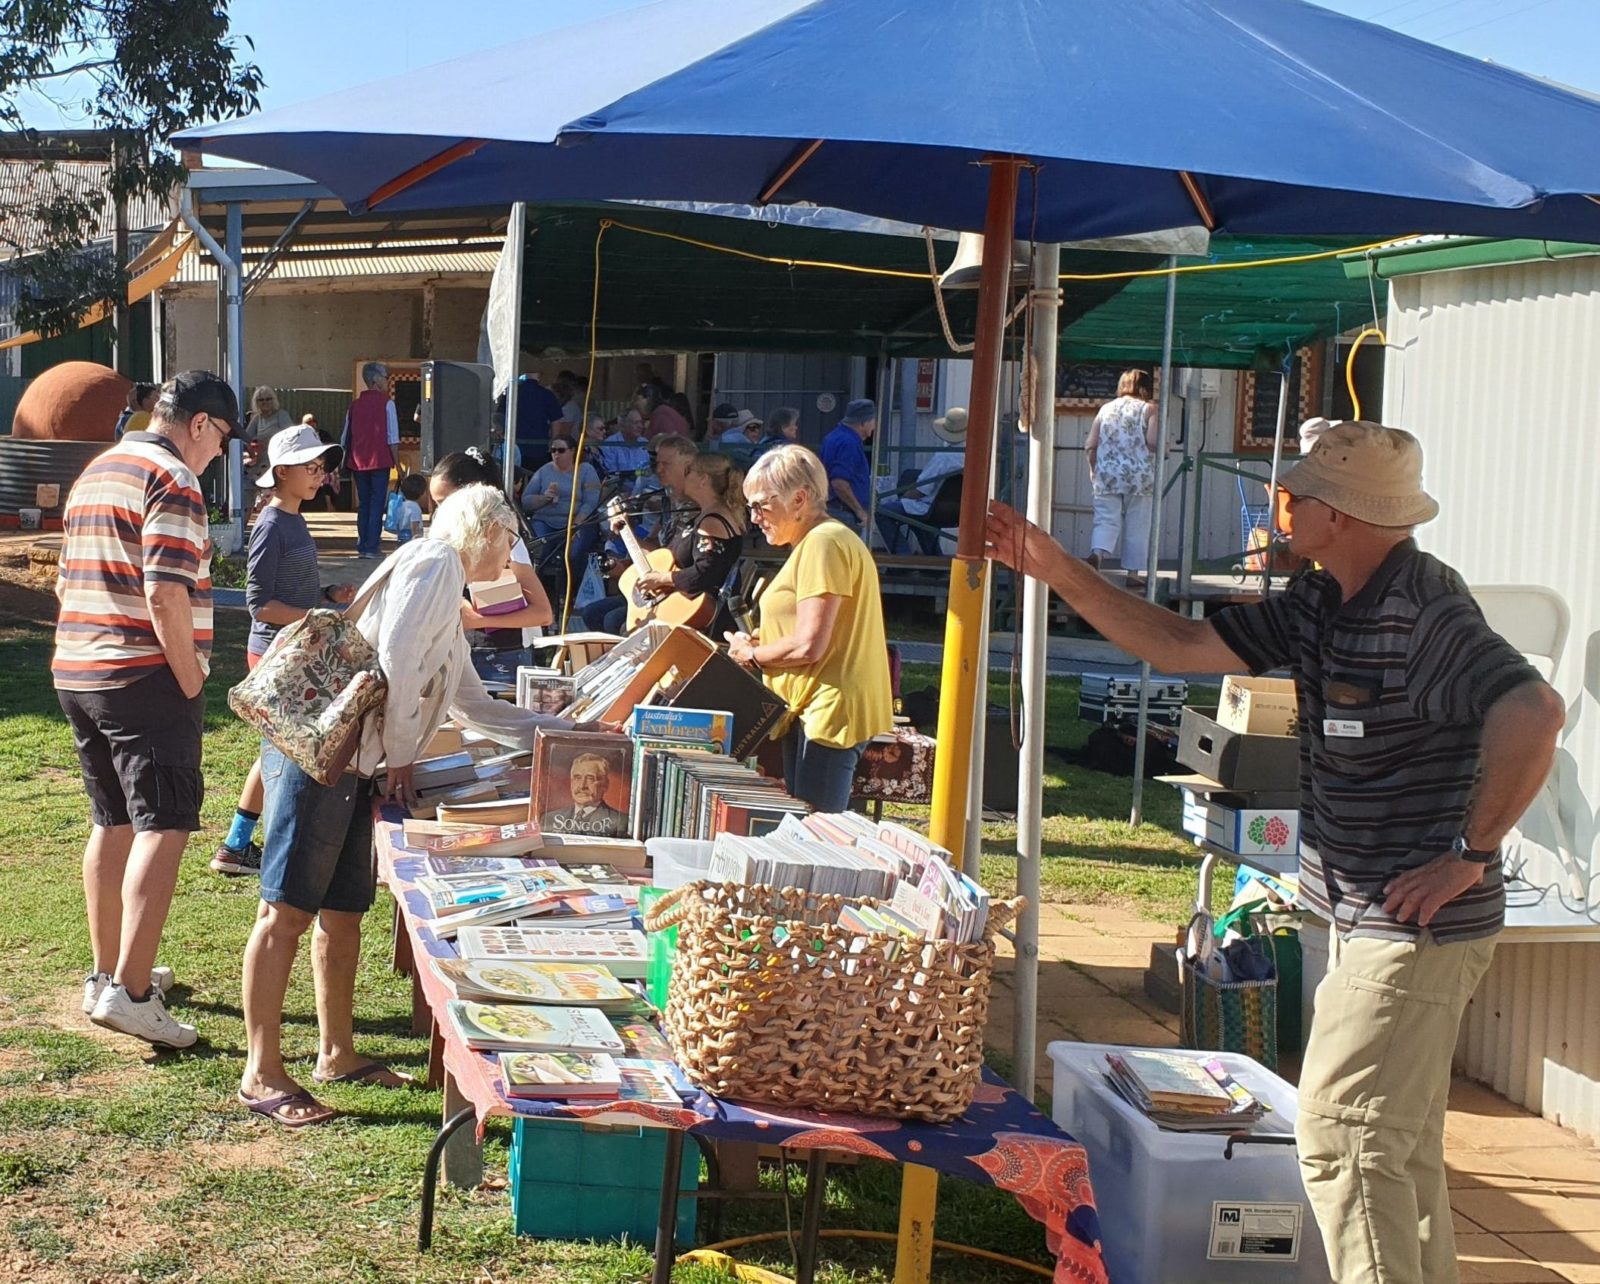 Book stall raising funds for the market site development